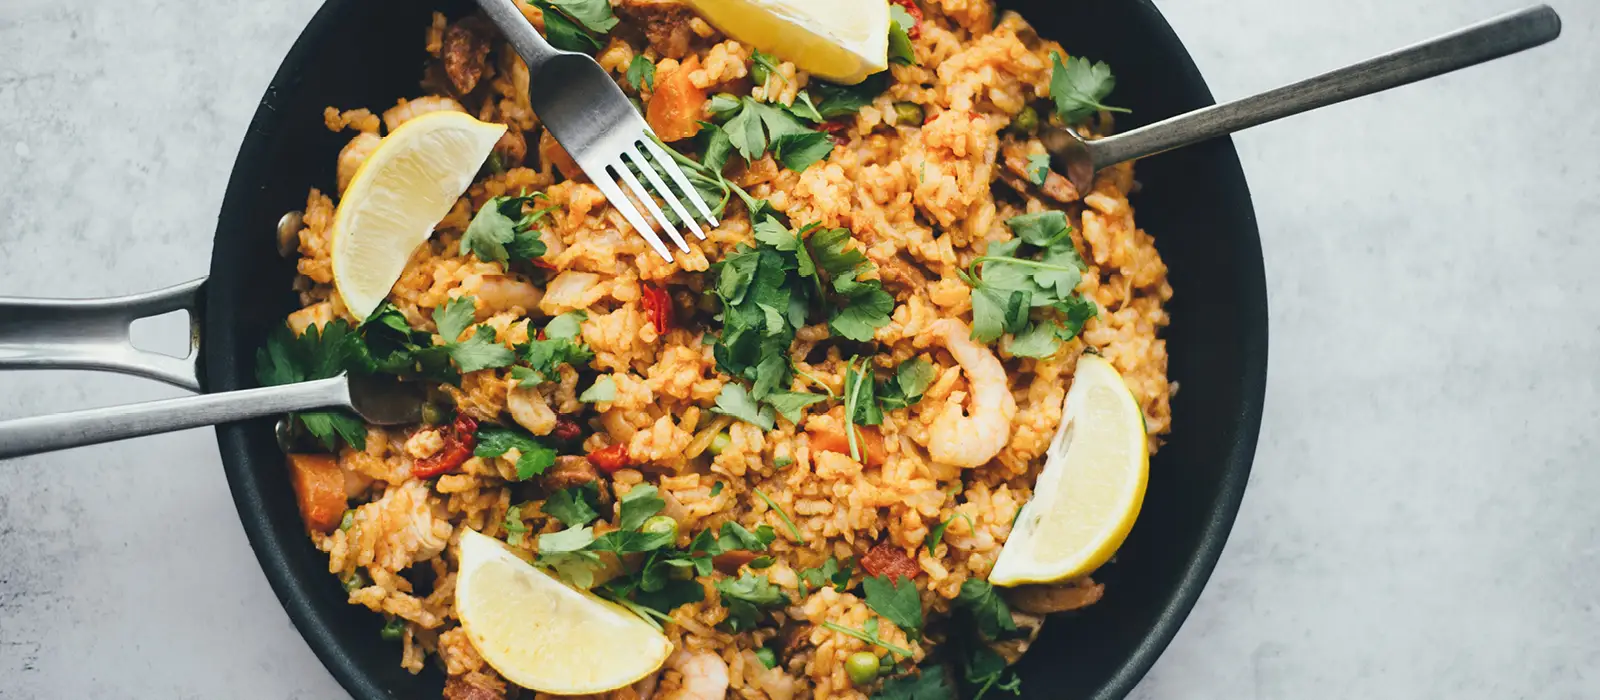 Bowl of paella with rice, prawns, lemon and herbs